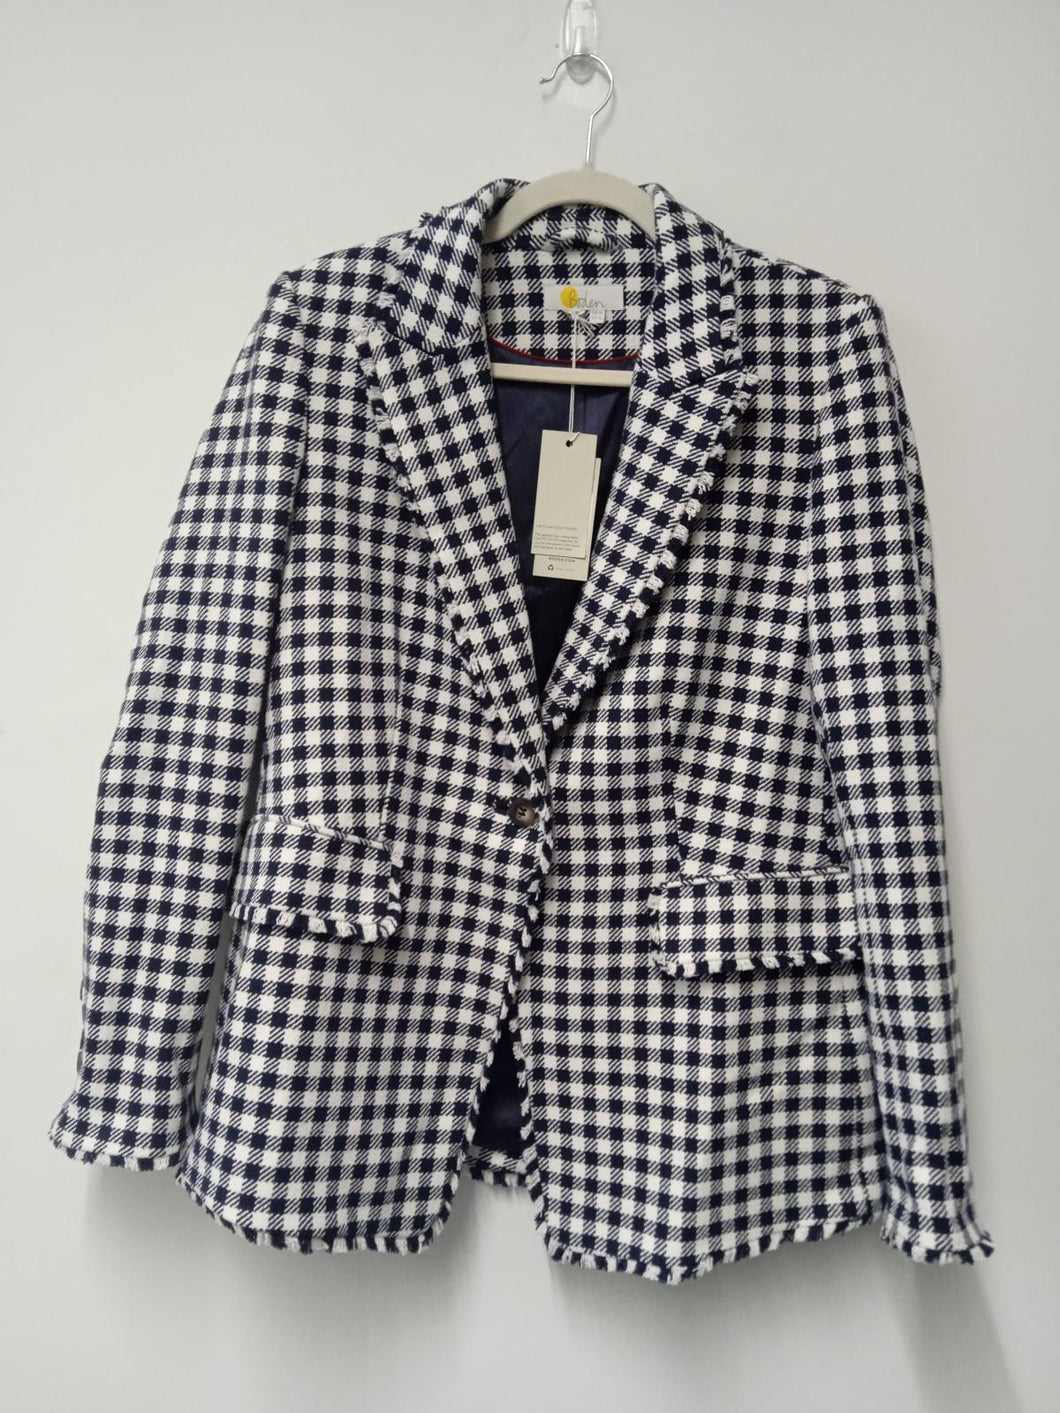 BODEN Ladies Navy Blue & White Check Long Sleeve Collared Jacket Size UK14R NEW